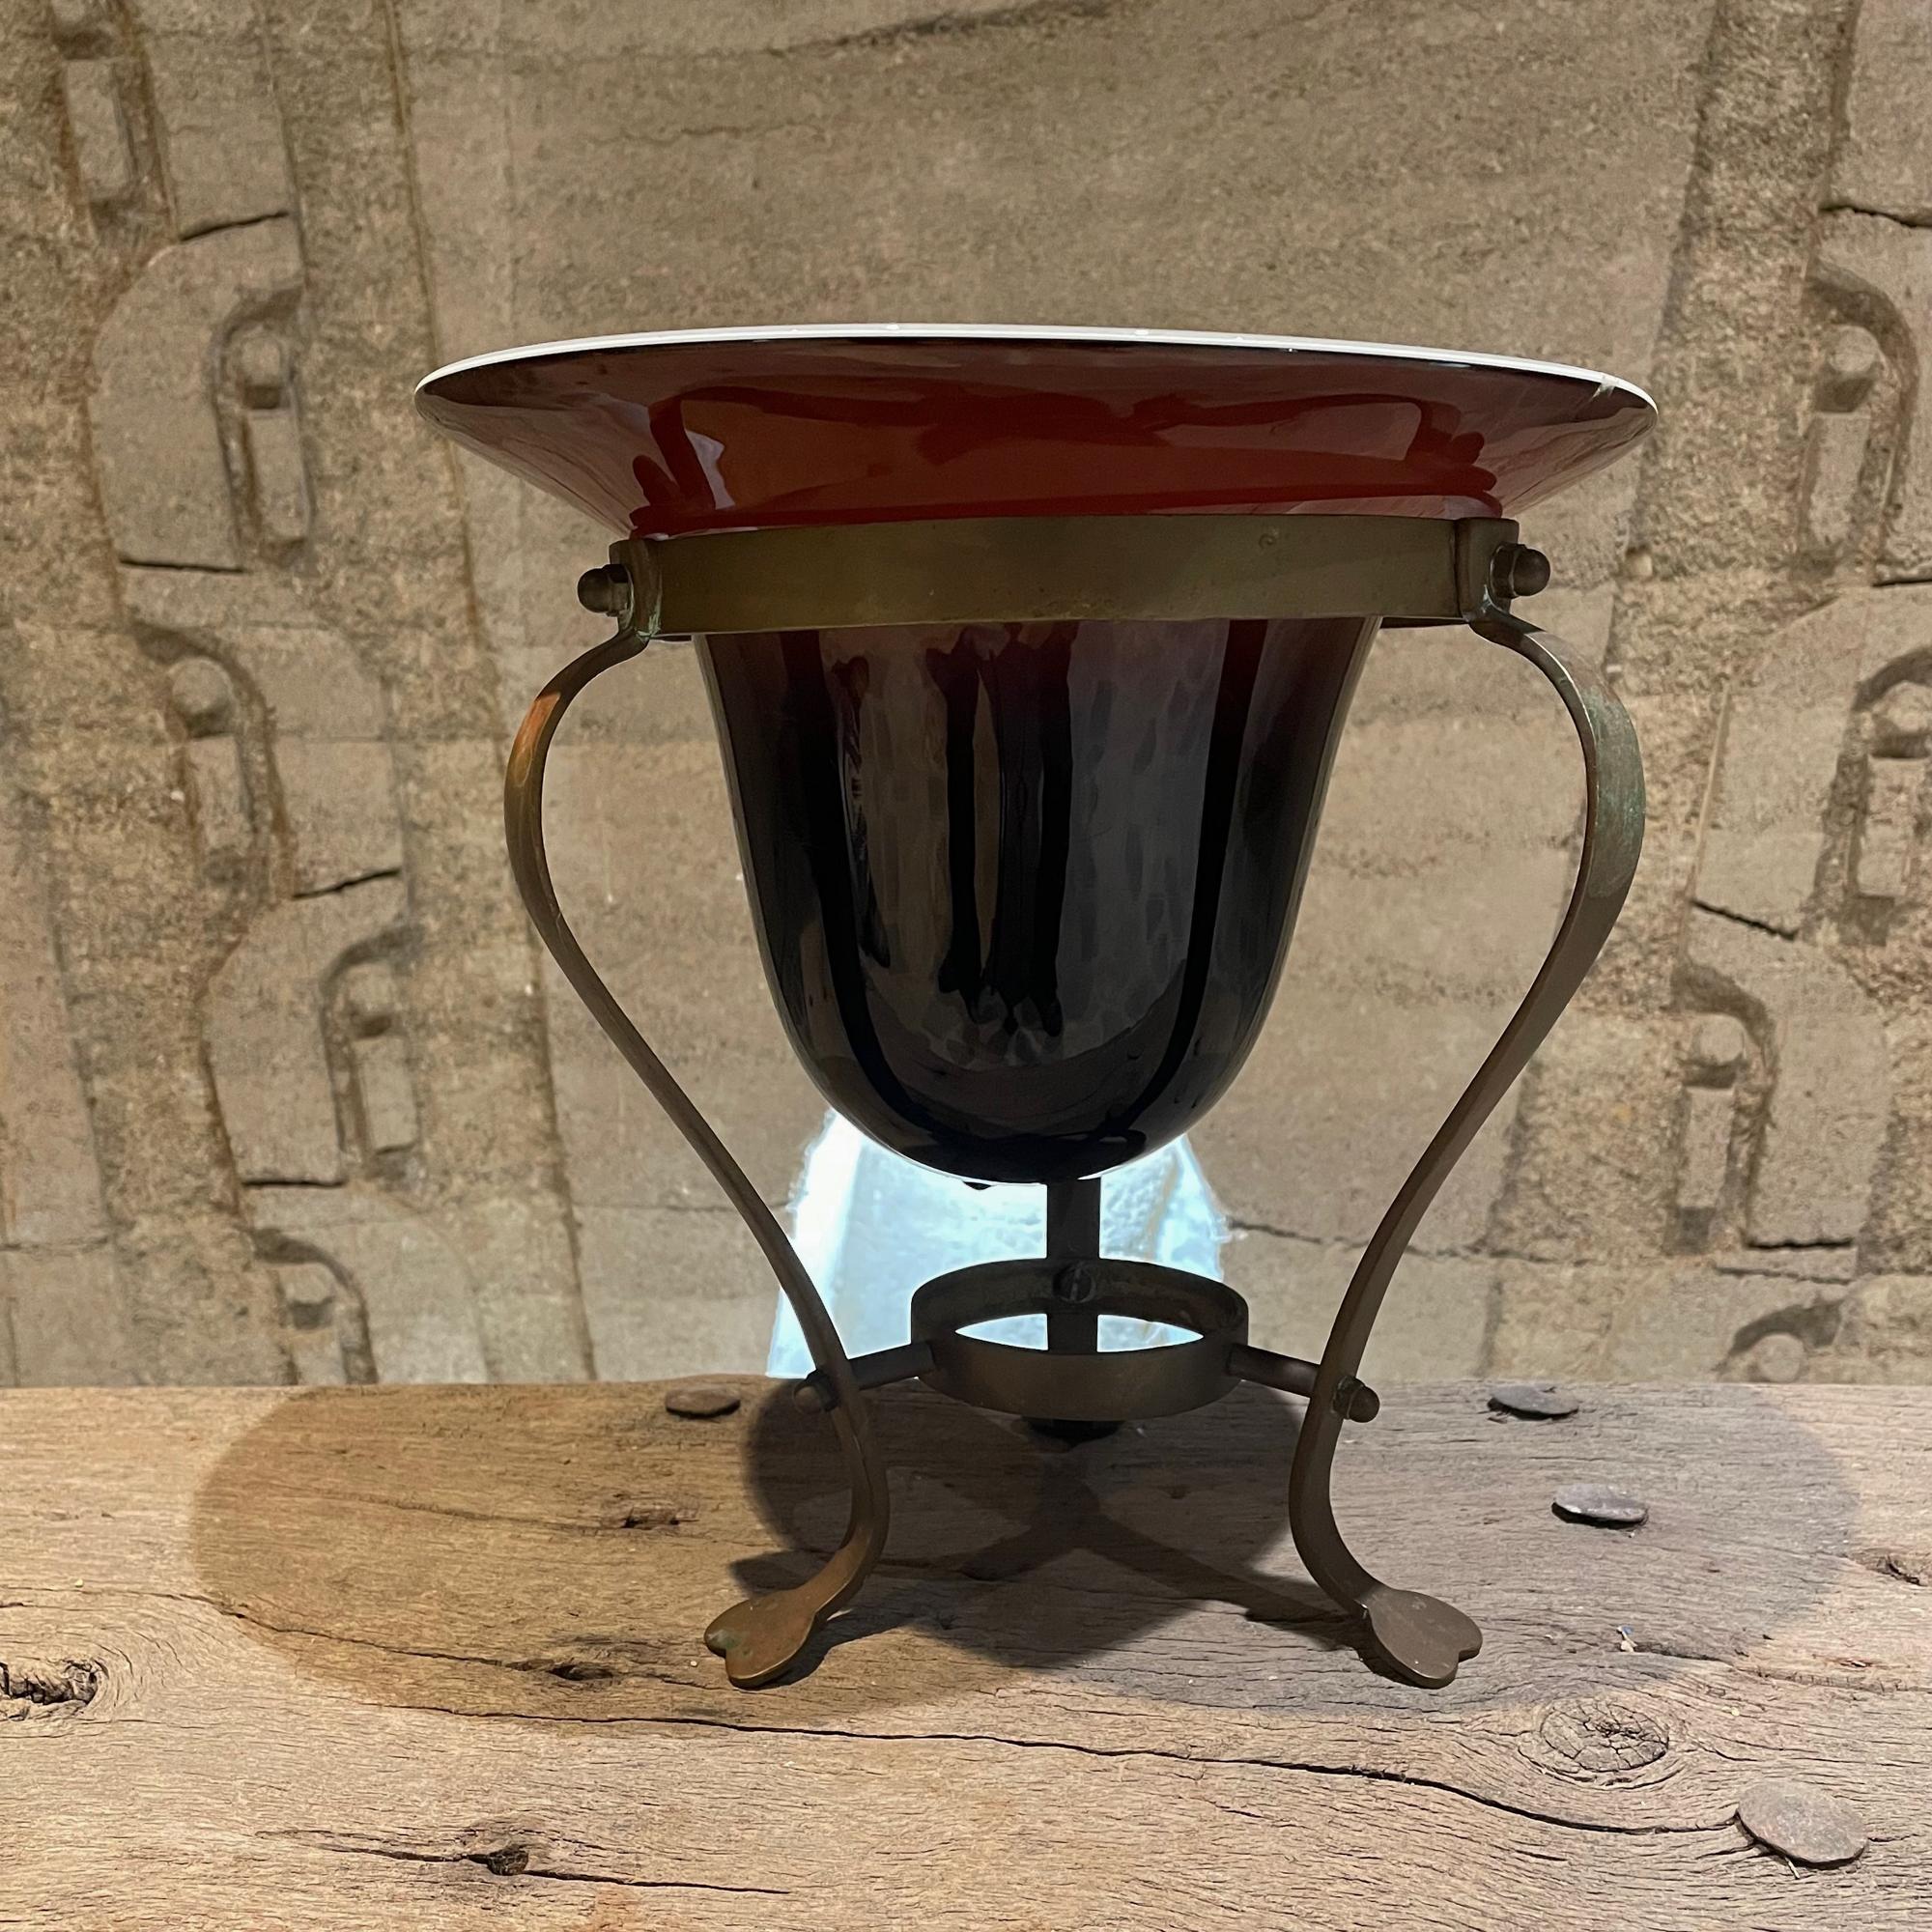 AMBIANIC offering:
Art Deco Decorative Vase Antique Handblown Glass Pedestal Bowl or Catch All Piece Platform of Solid Bronze USA 1940s.
Unmarked.
Dimensions: 11.25 H x 11 inches in diameter
Original vintage unrestored preowned condition. Patina is